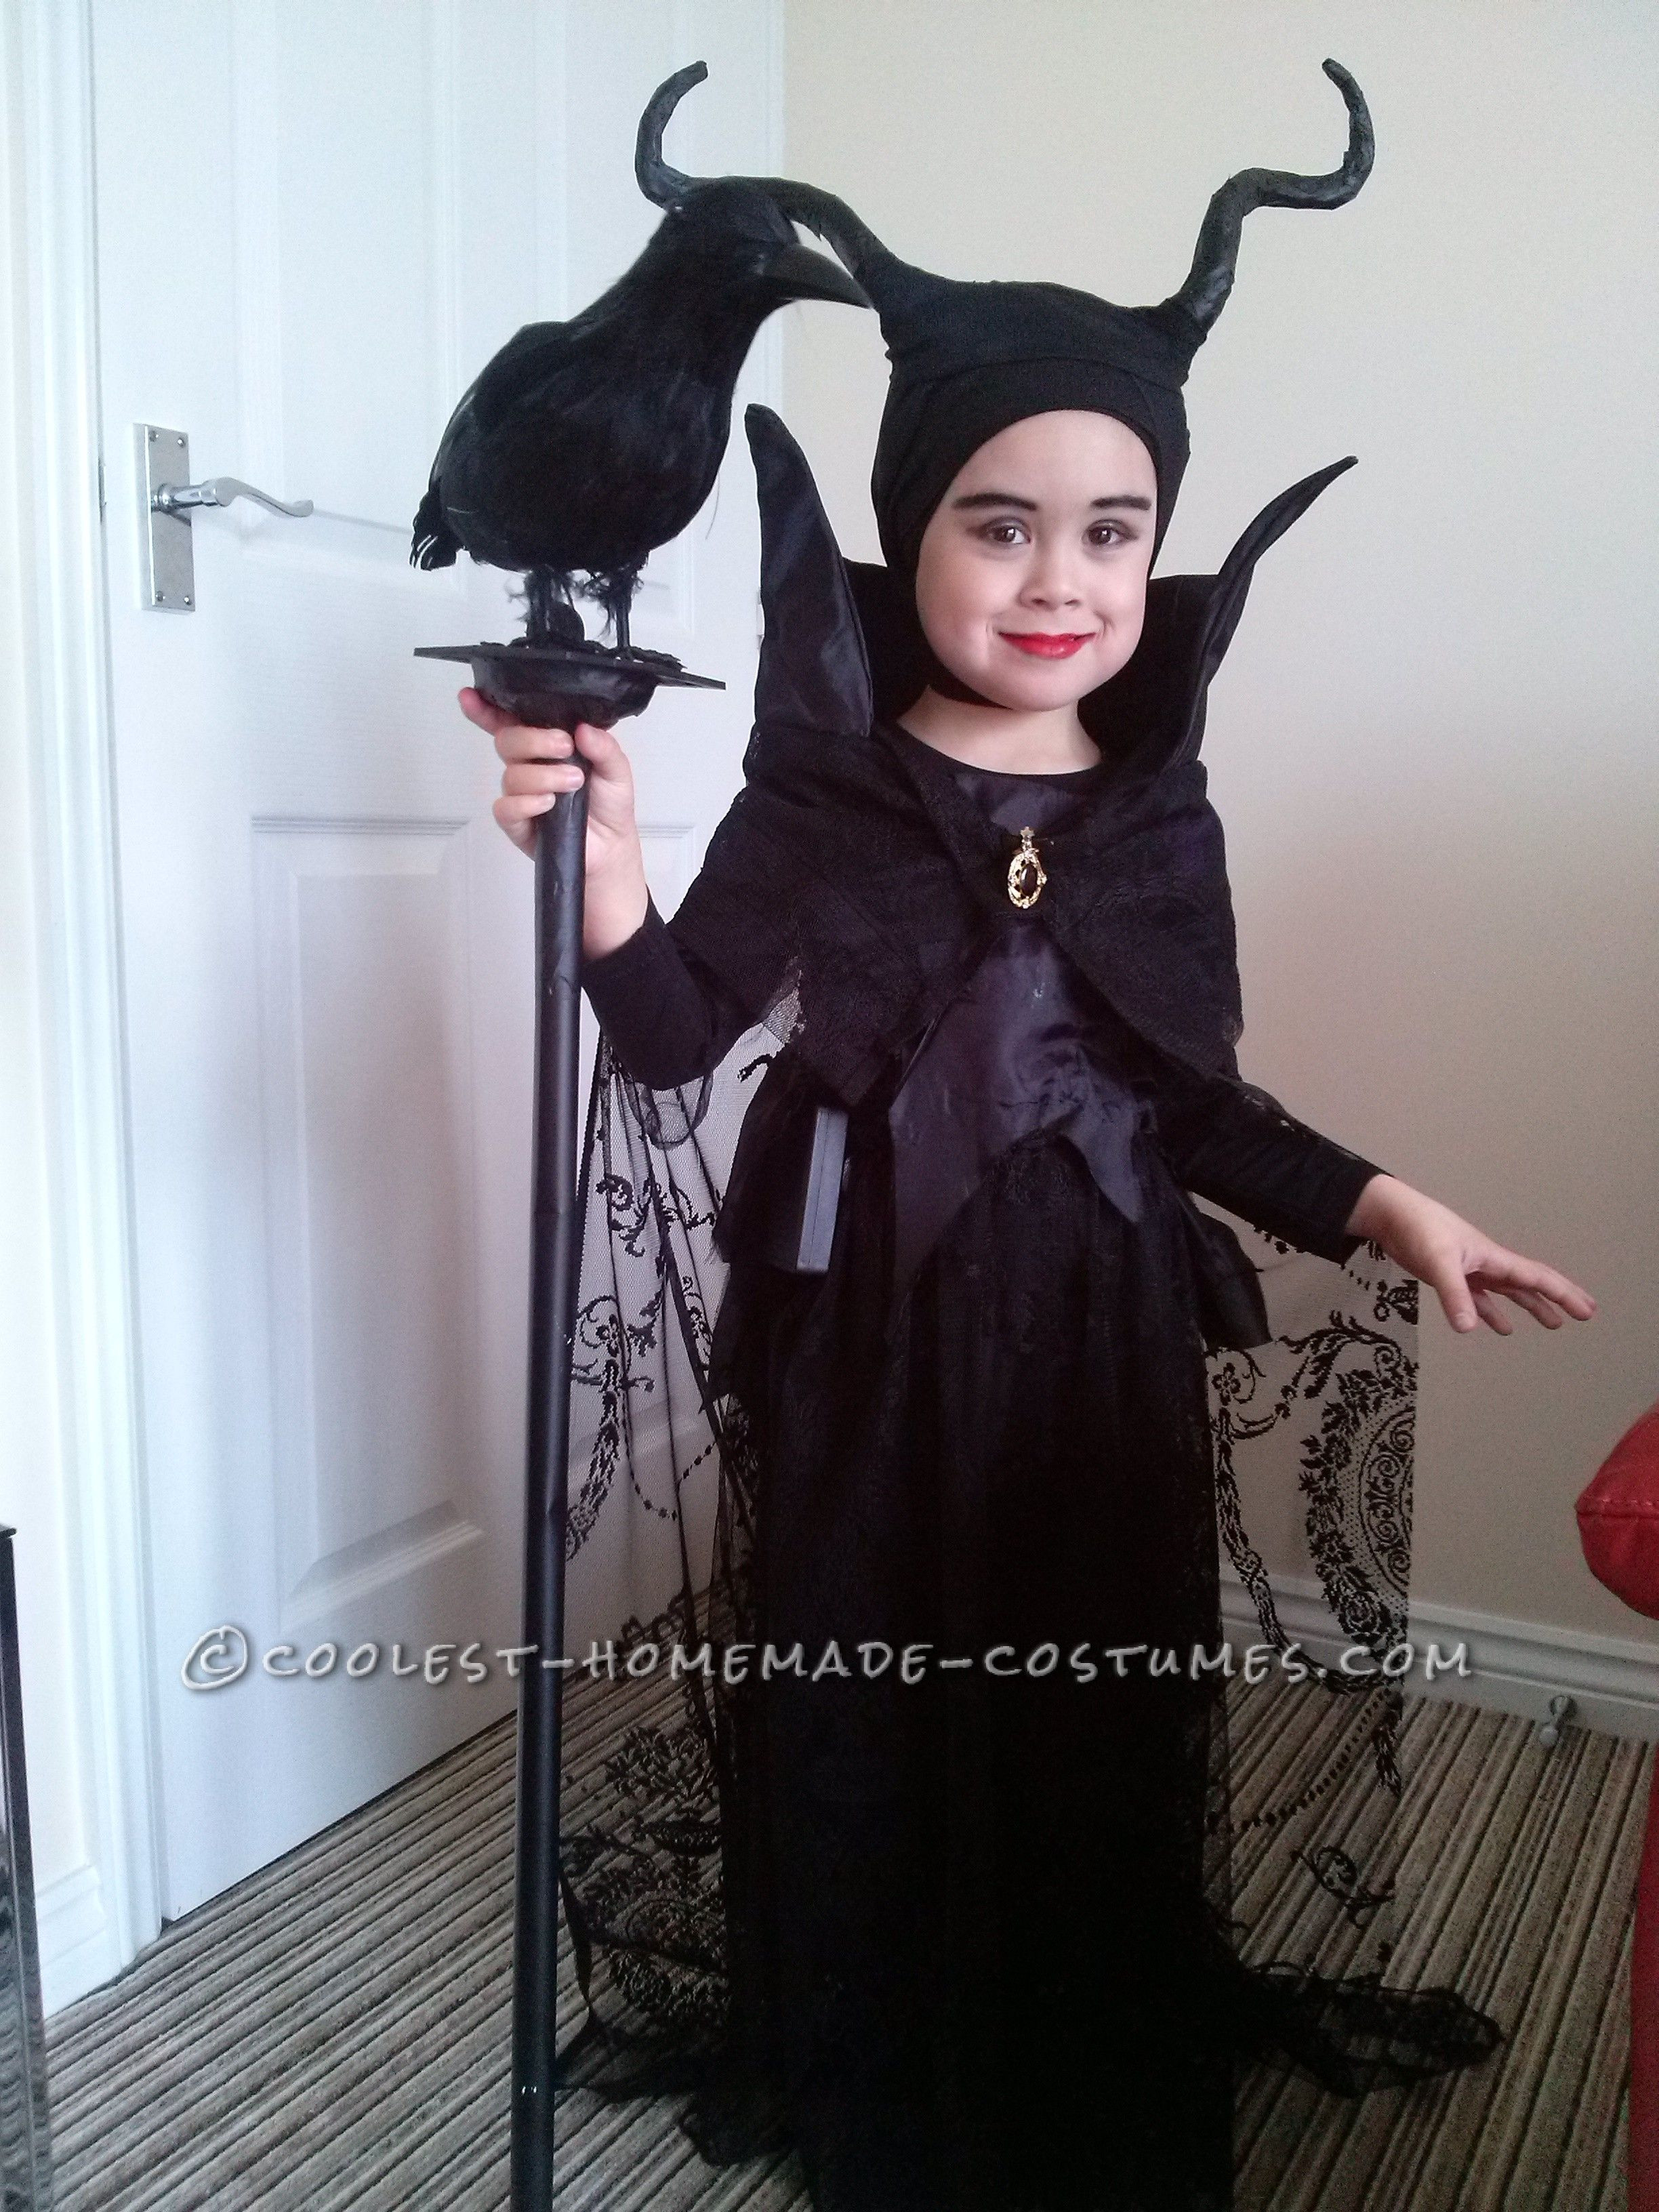 Maleficent DIY Costume
 Our Own 4 Year Old Maleficent